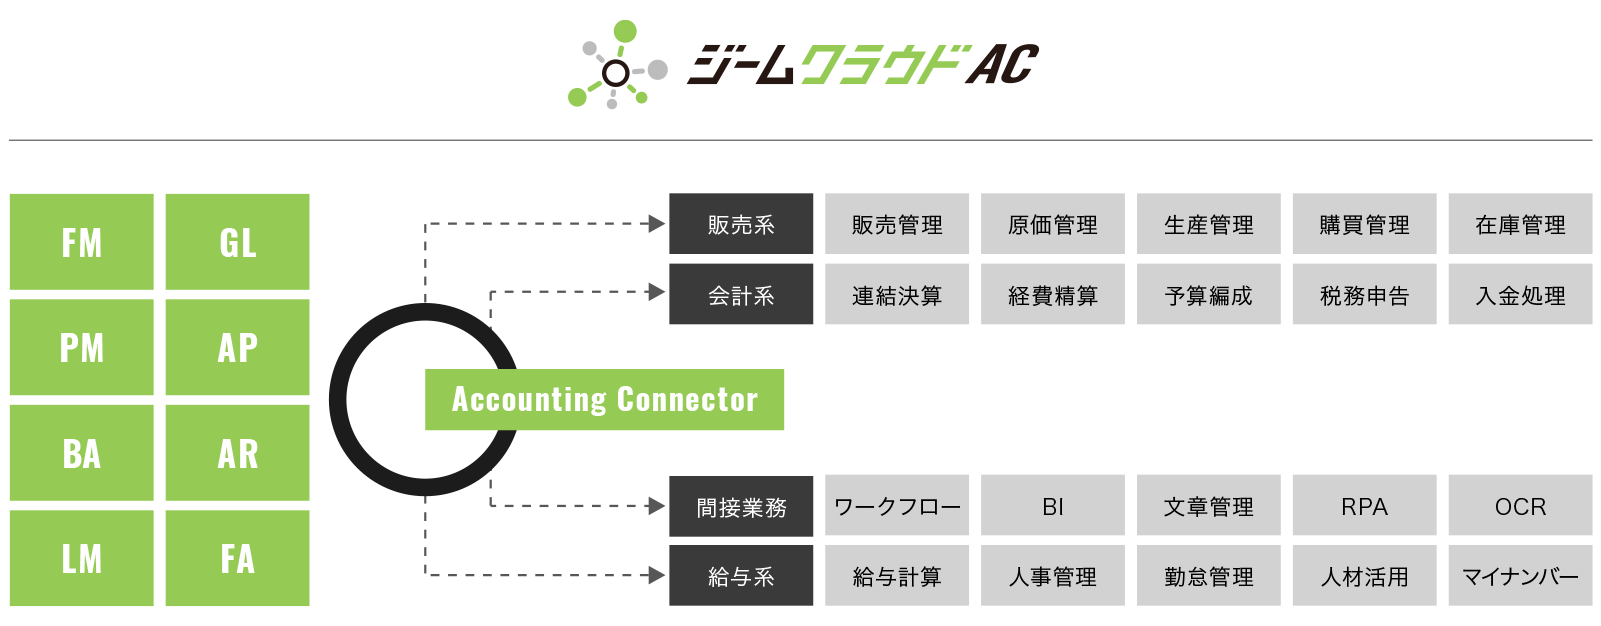 Accounting Connector